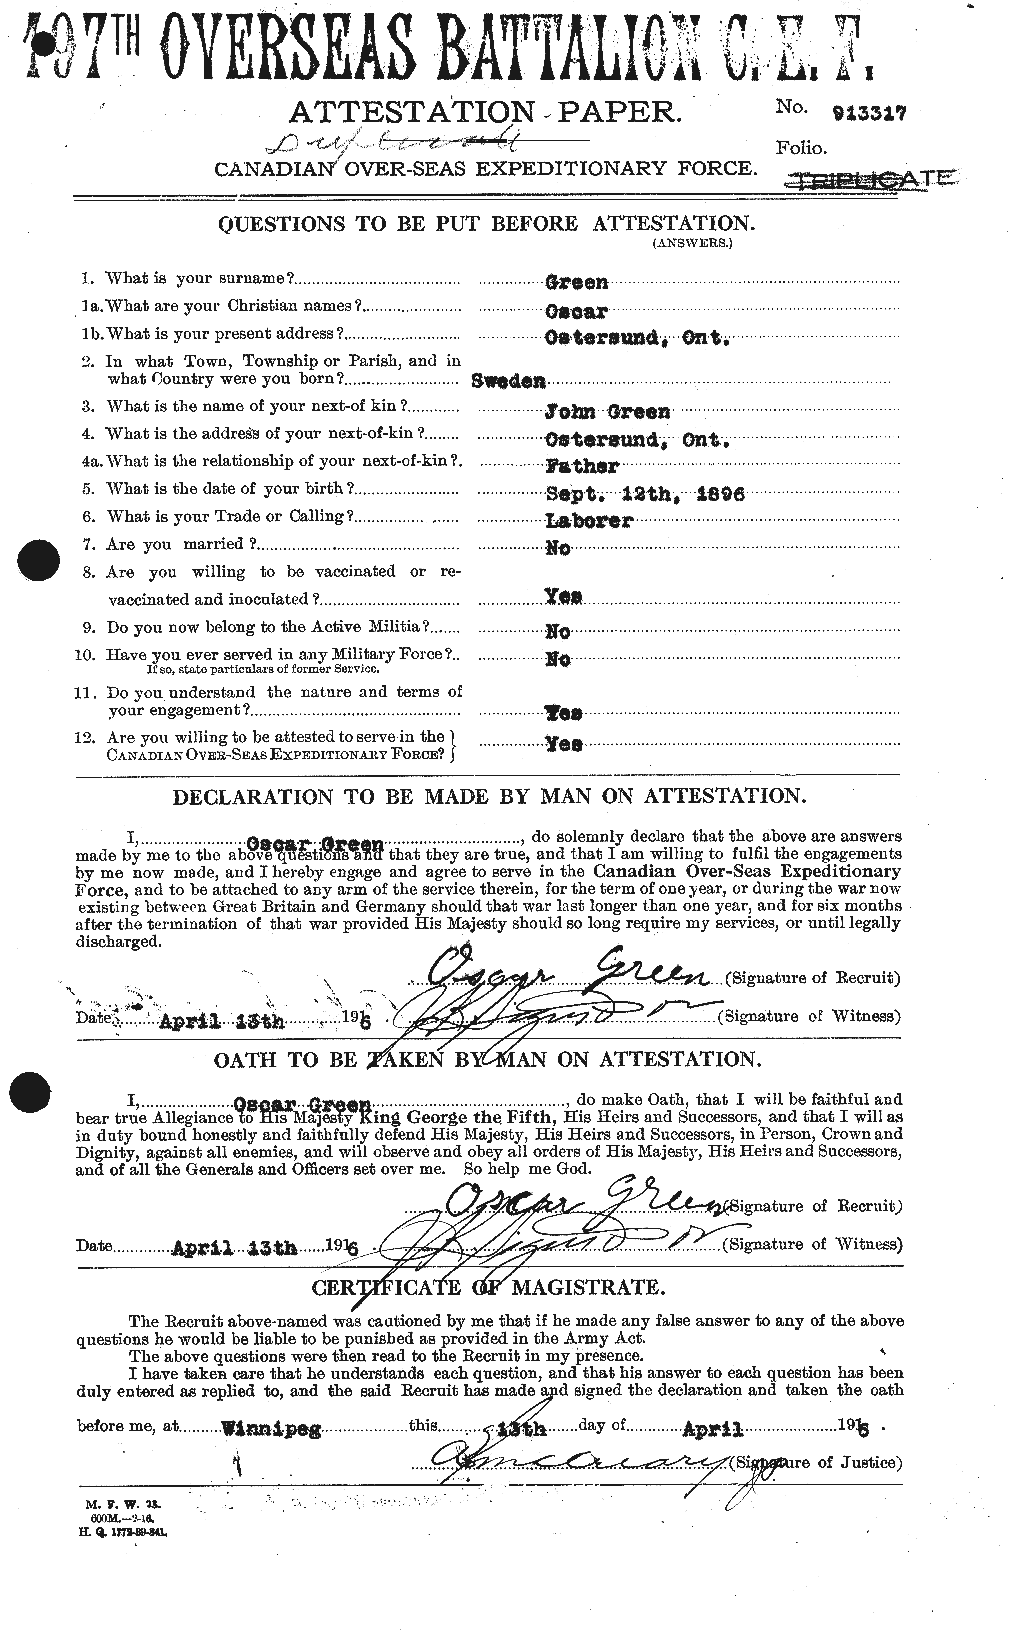 Personnel Records of the First World War - CEF 363587a